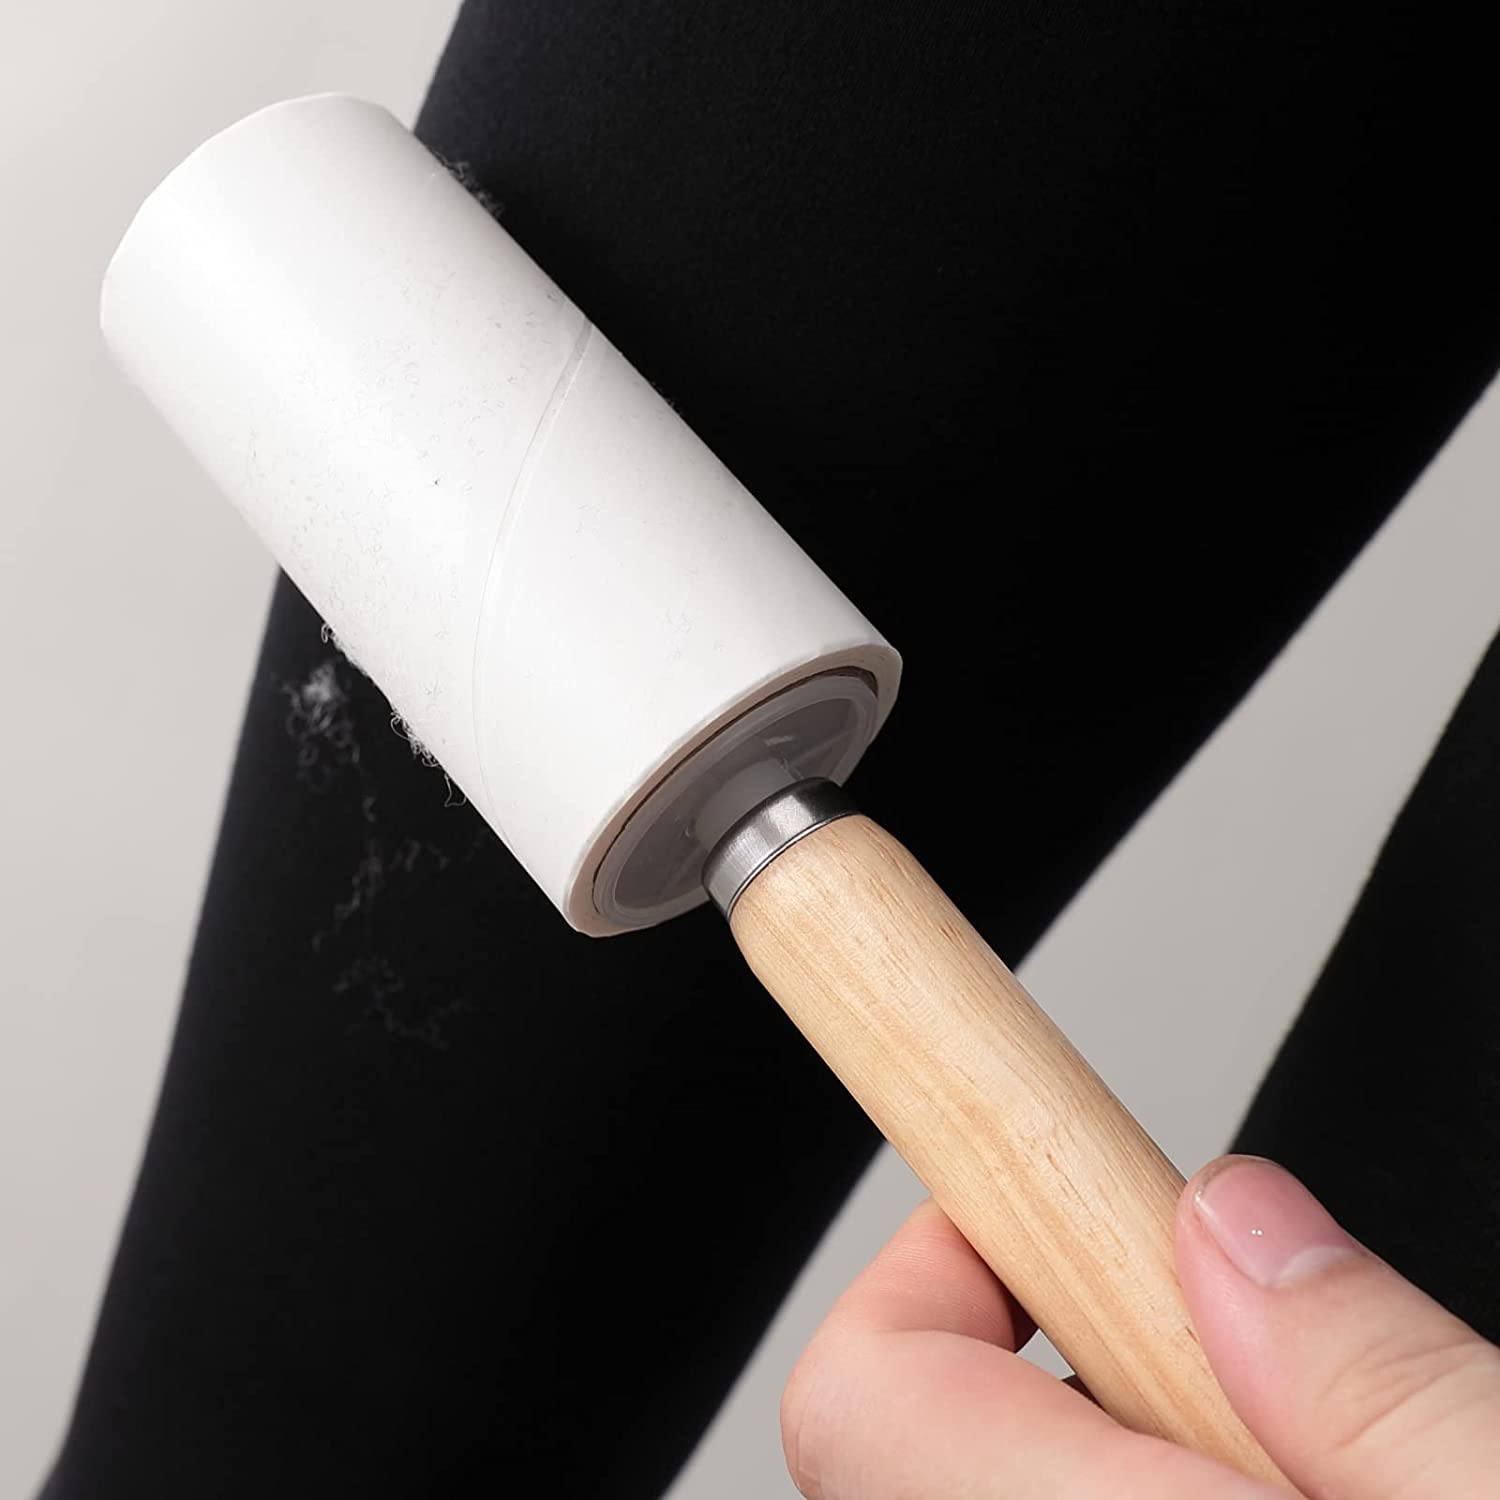 The Better Home Lint Roller for Clothes Replacement Rolls